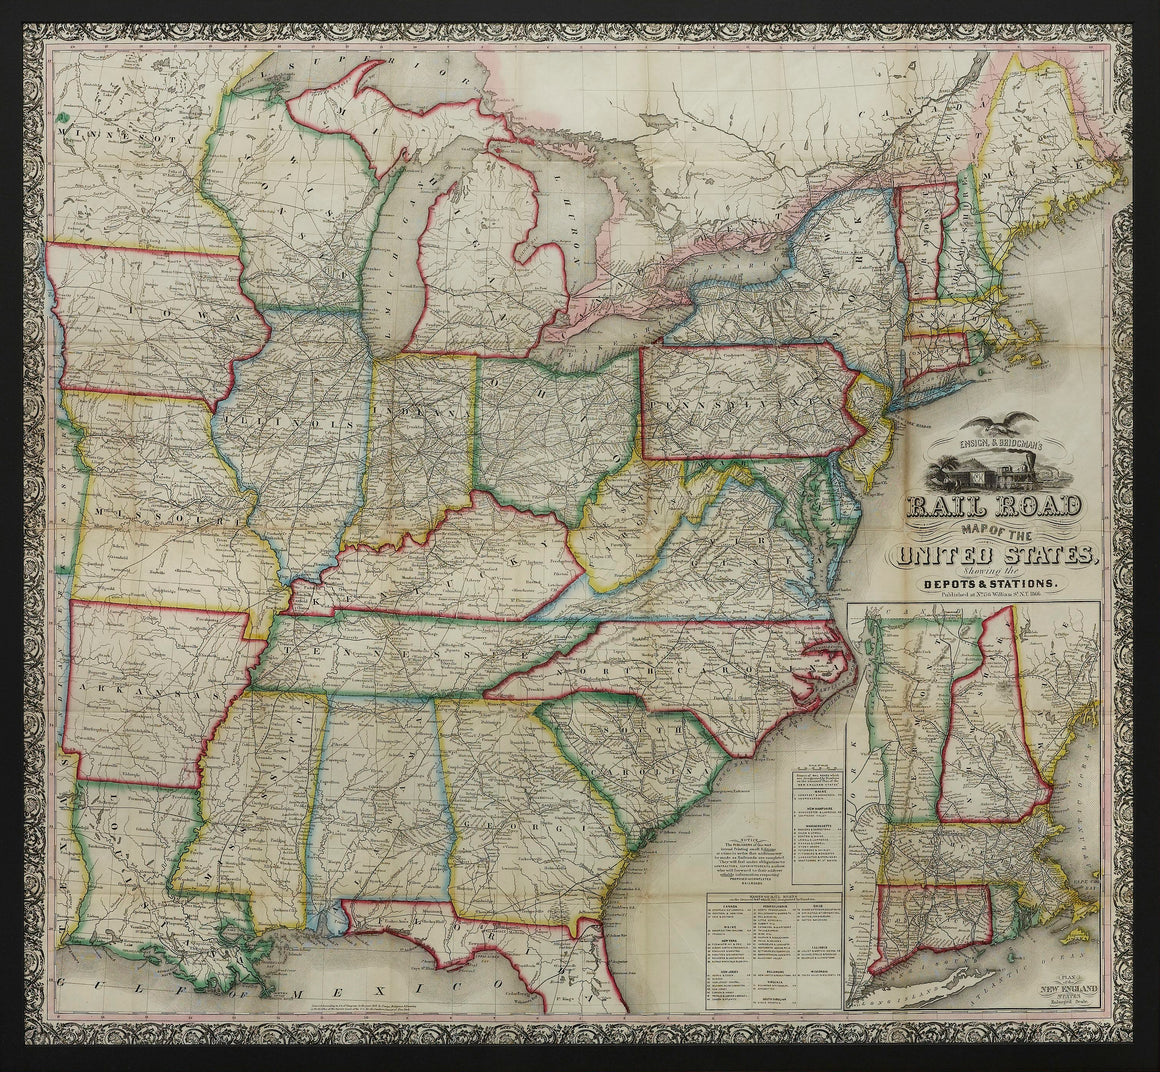 1866 "Ensign & Bridgman's Rail Road Map of the United States, showing Depots & Stations"